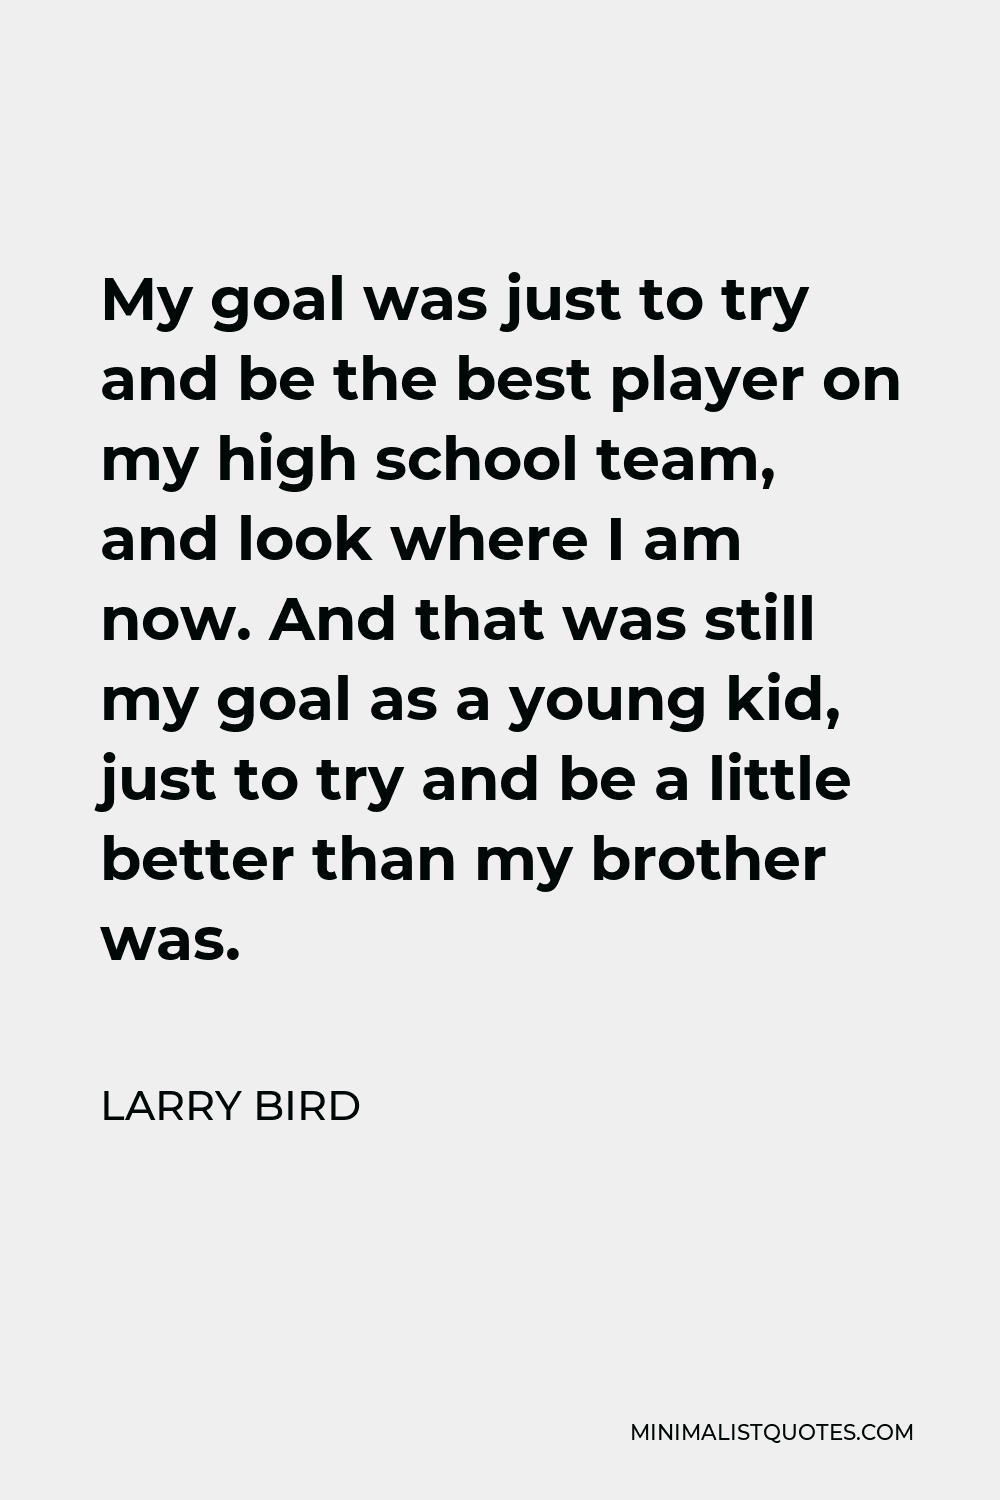 Larry Bird Quote - My goal was just to try and be the best player on my high school team, and look where I am now. And that was still my goal as a young kid, just to try and be a little better than my brother was.